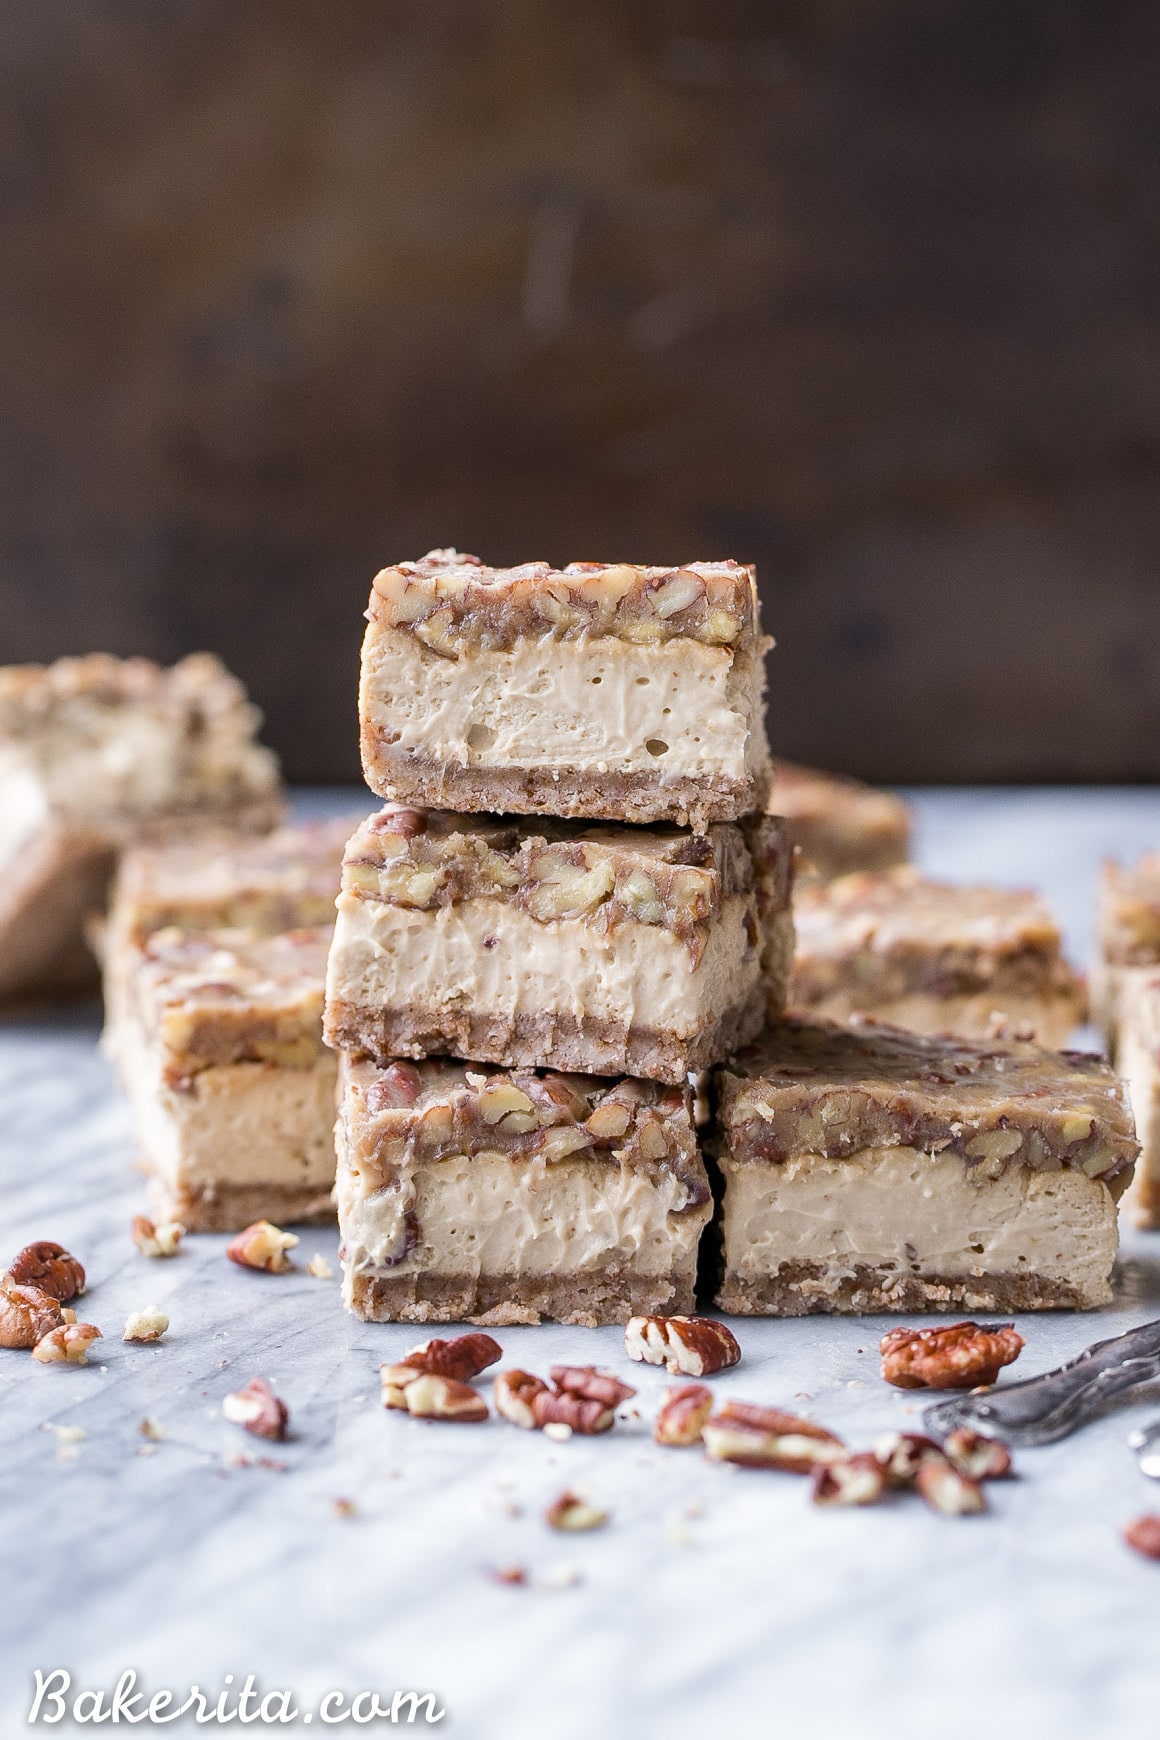 These Gluten Free Pecan Praline Cheesecake Bars will be your new favorite dessert! The super creamy cheesecake filling has a sweet + crunchy pecan praline topping.